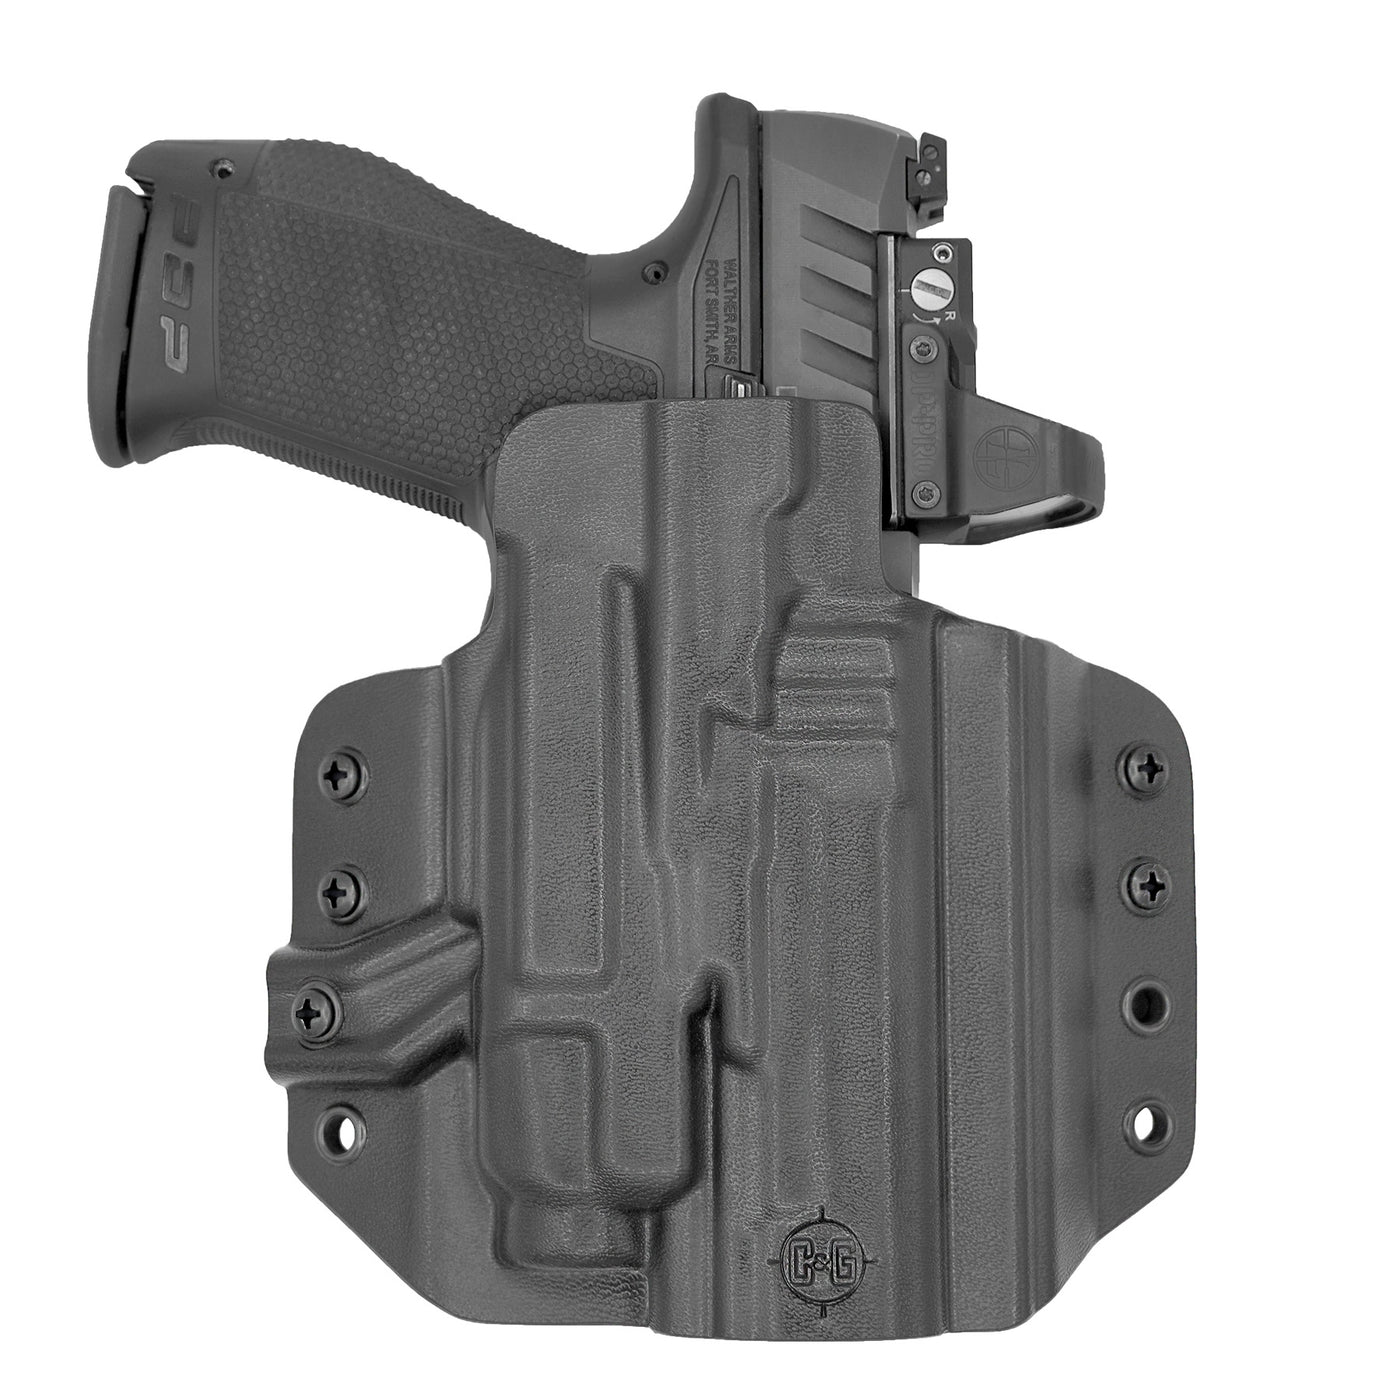 C&G Holsters quickship OWB Tactical H&K P30/sk Streamlight TLR7/a in holstered position